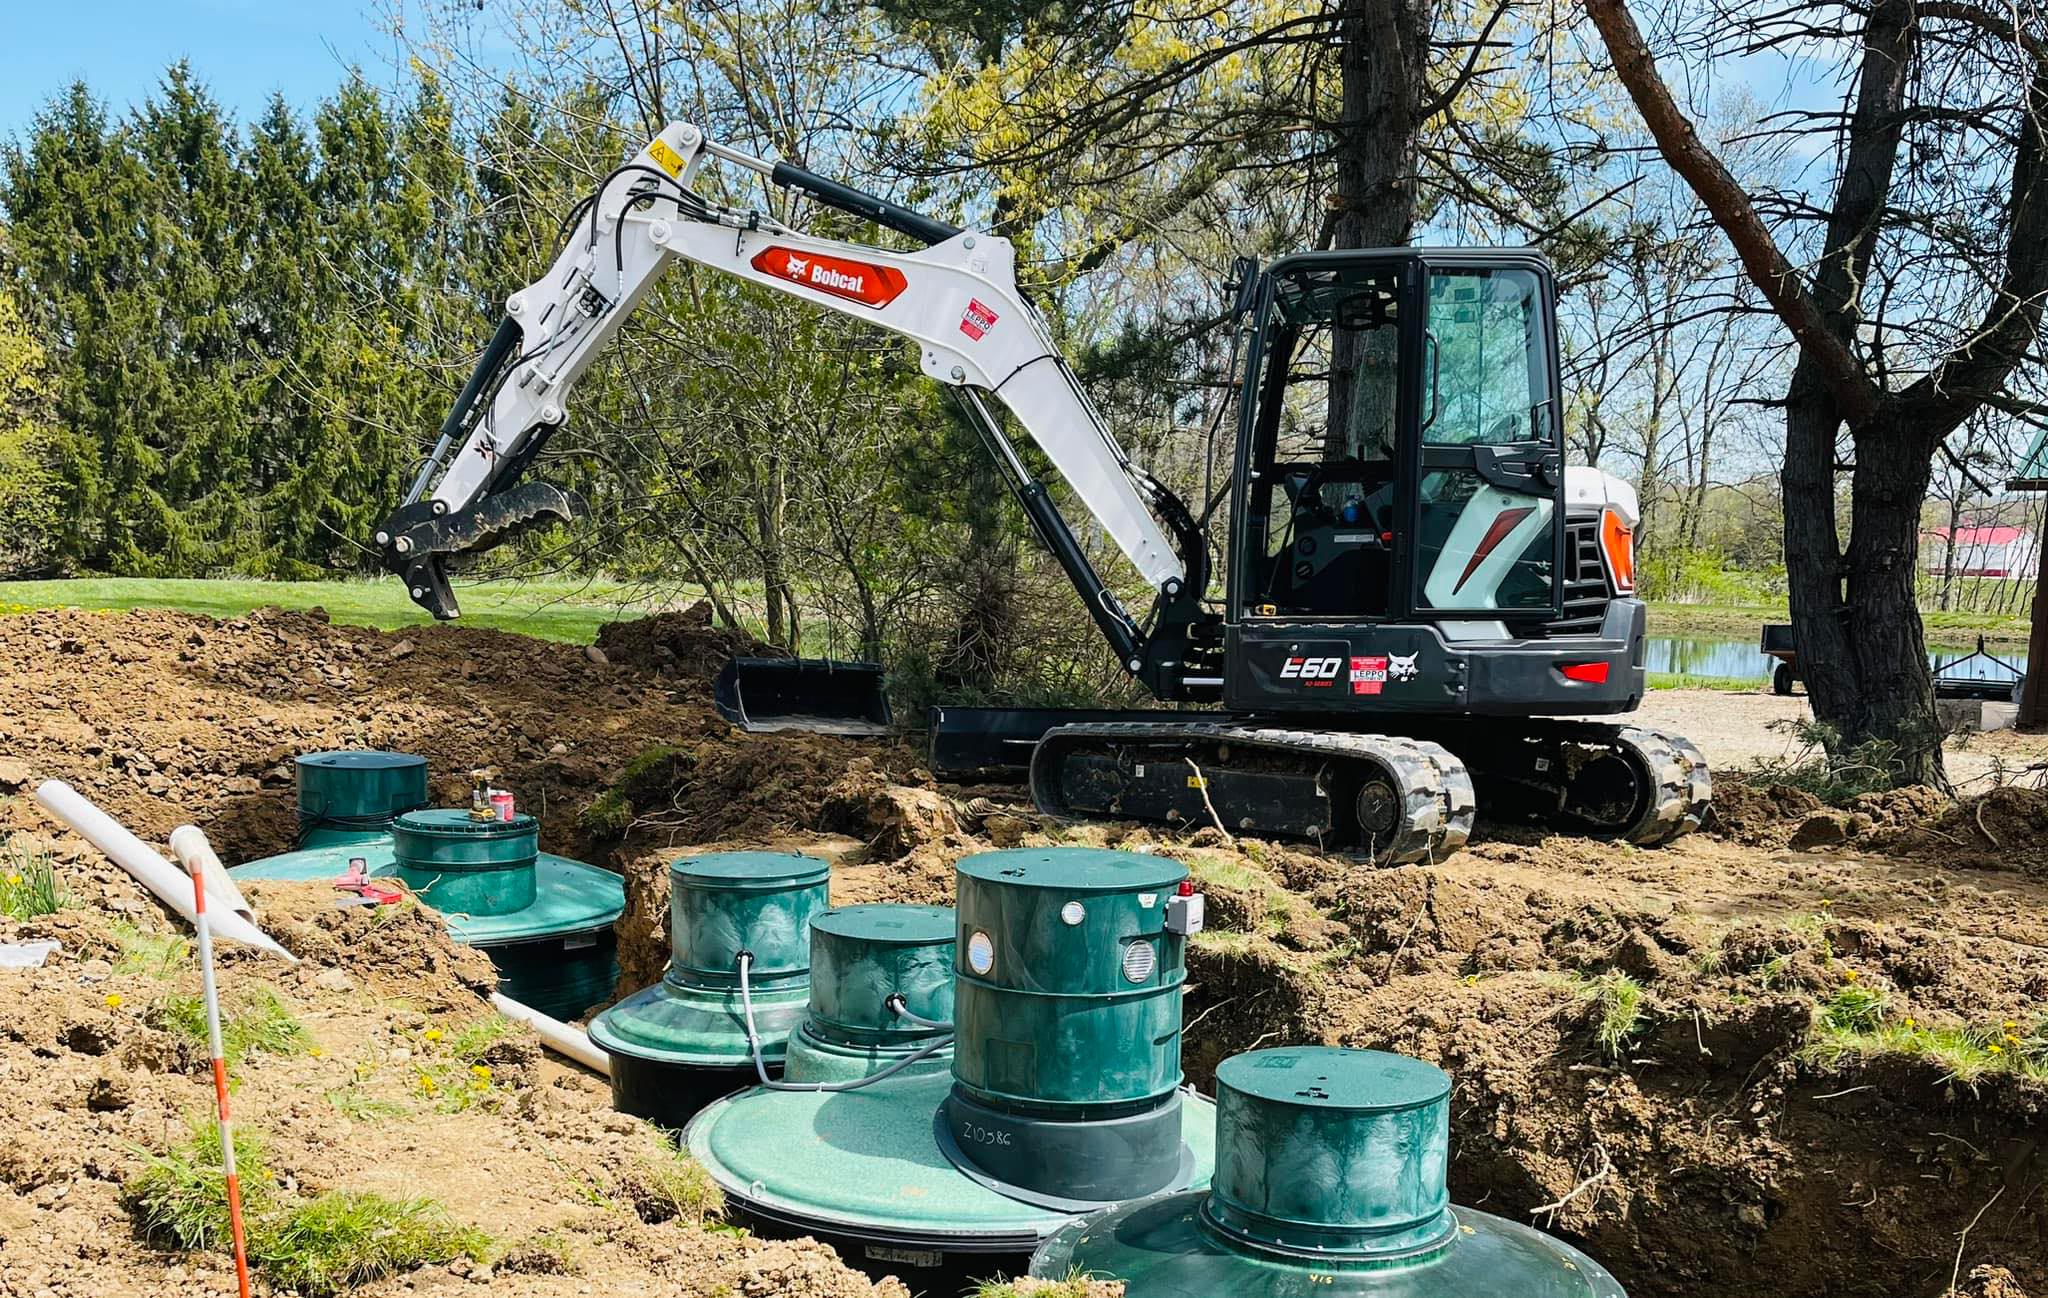 Earthworks handles anything that requires a shovel and machine to move dirt—from septic and sewers, to land clearing, pond installation, basement waterproofing, new build and demolition.